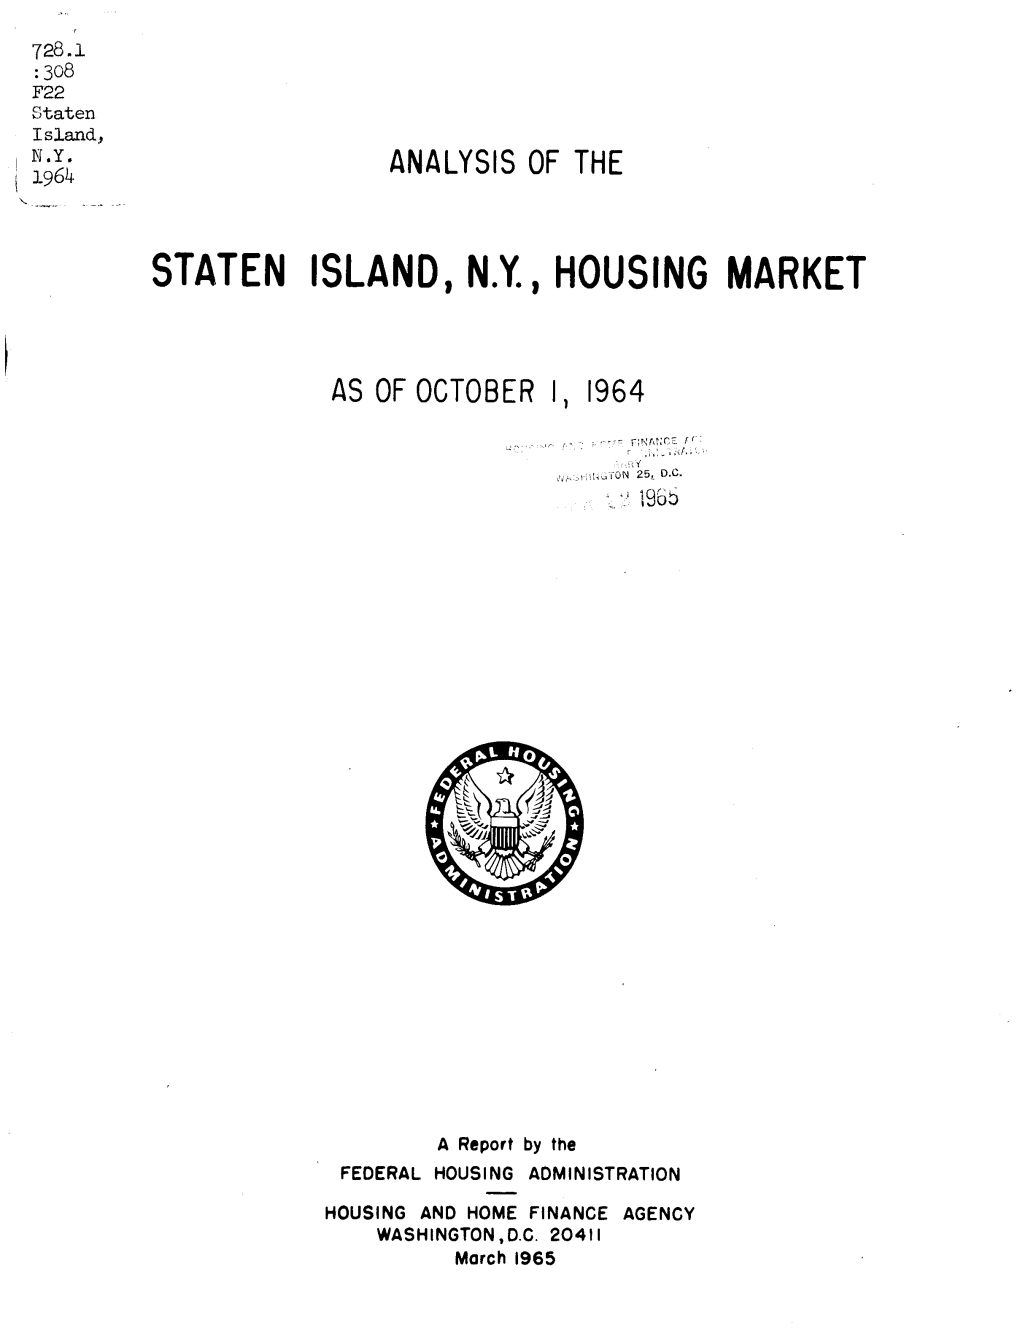 Analysis of the State Island N Y Housing Market As Of